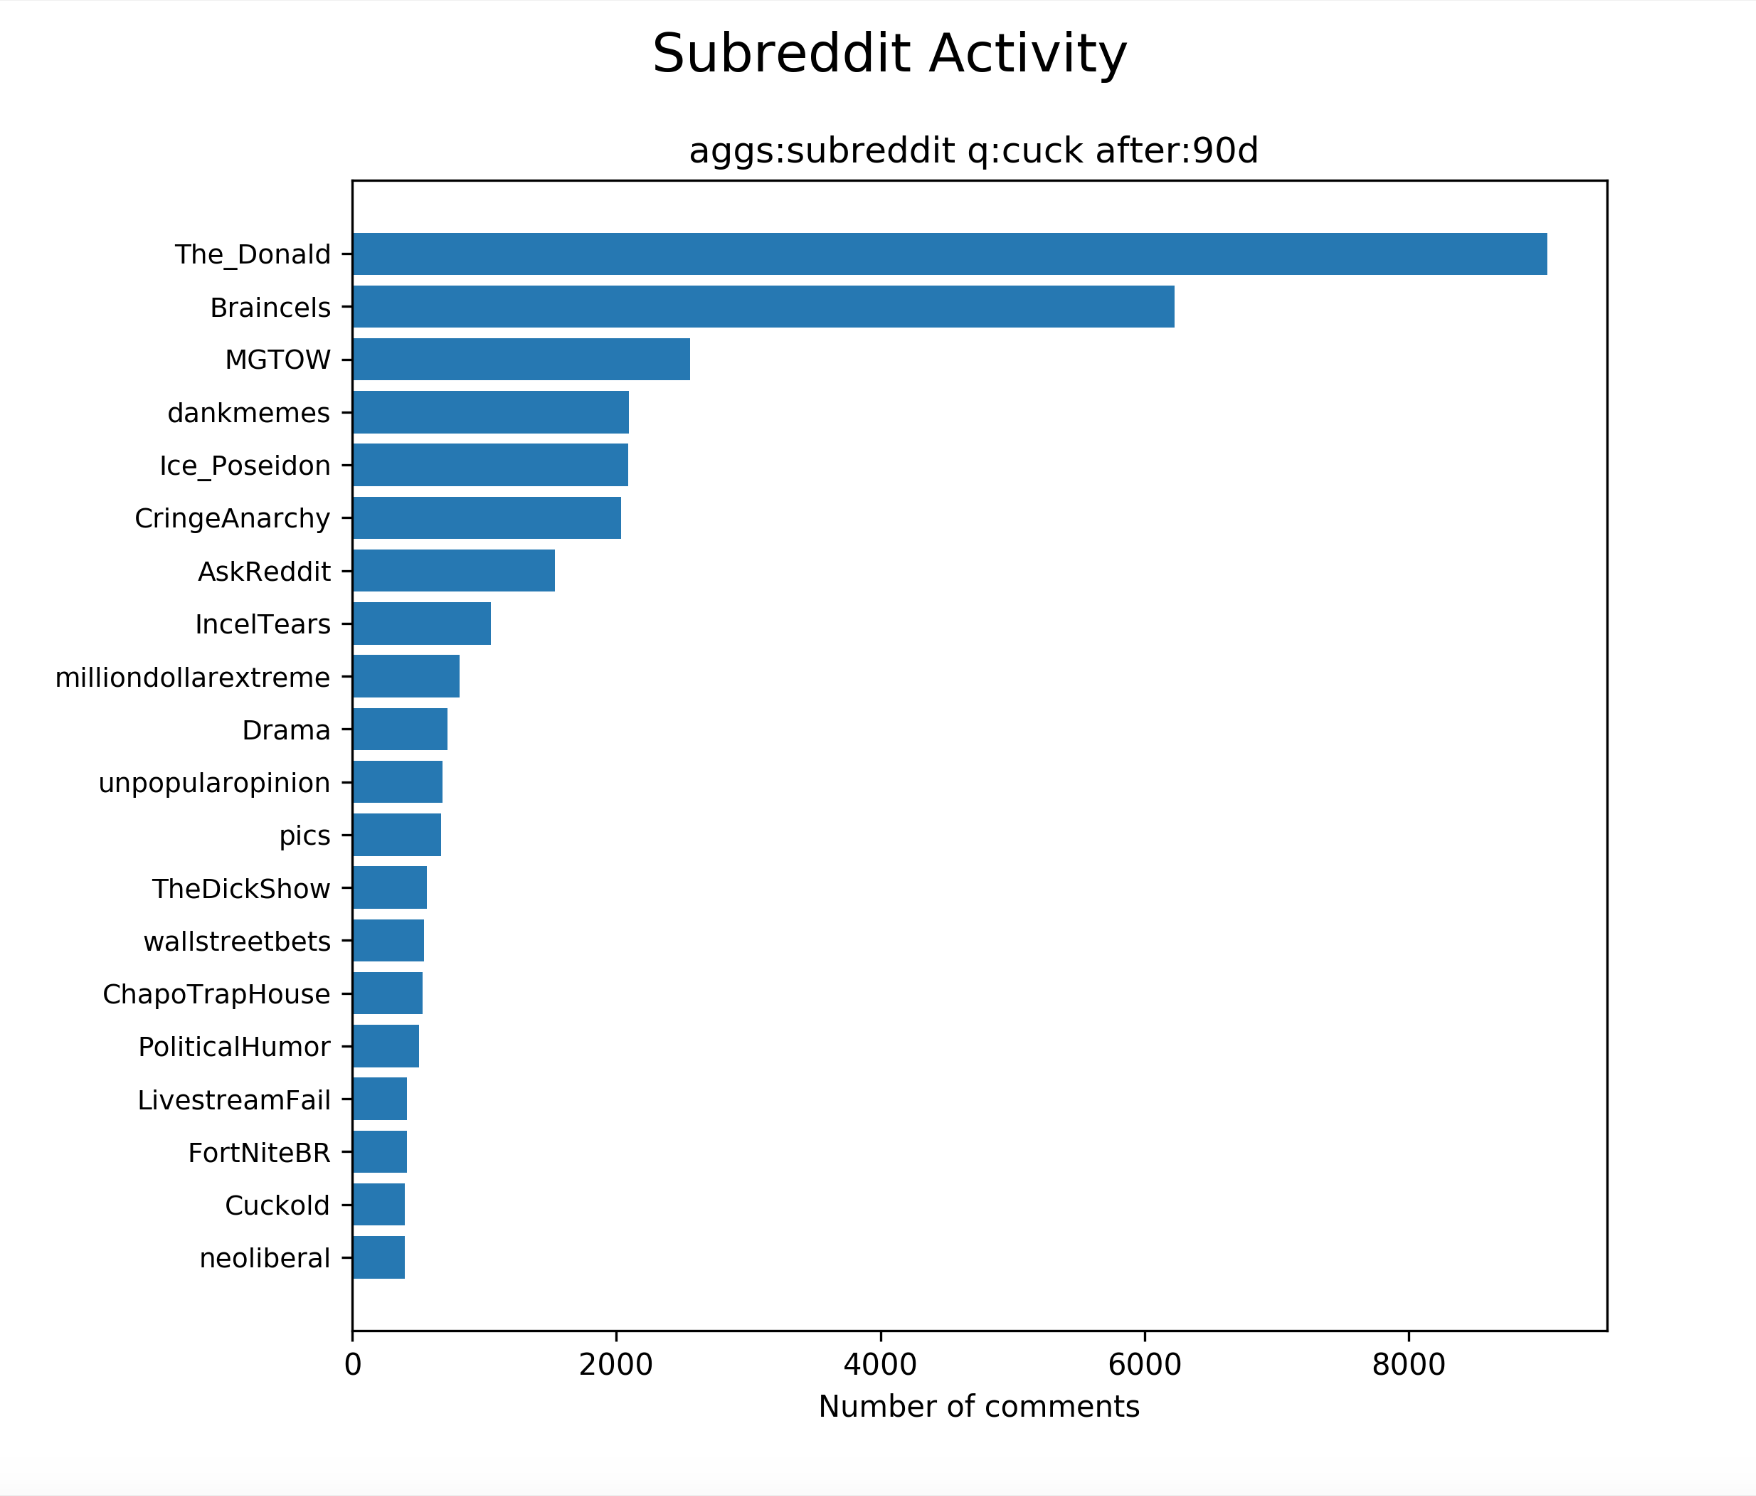 Subreddits most commonly using "cuck" over most recent 90 days